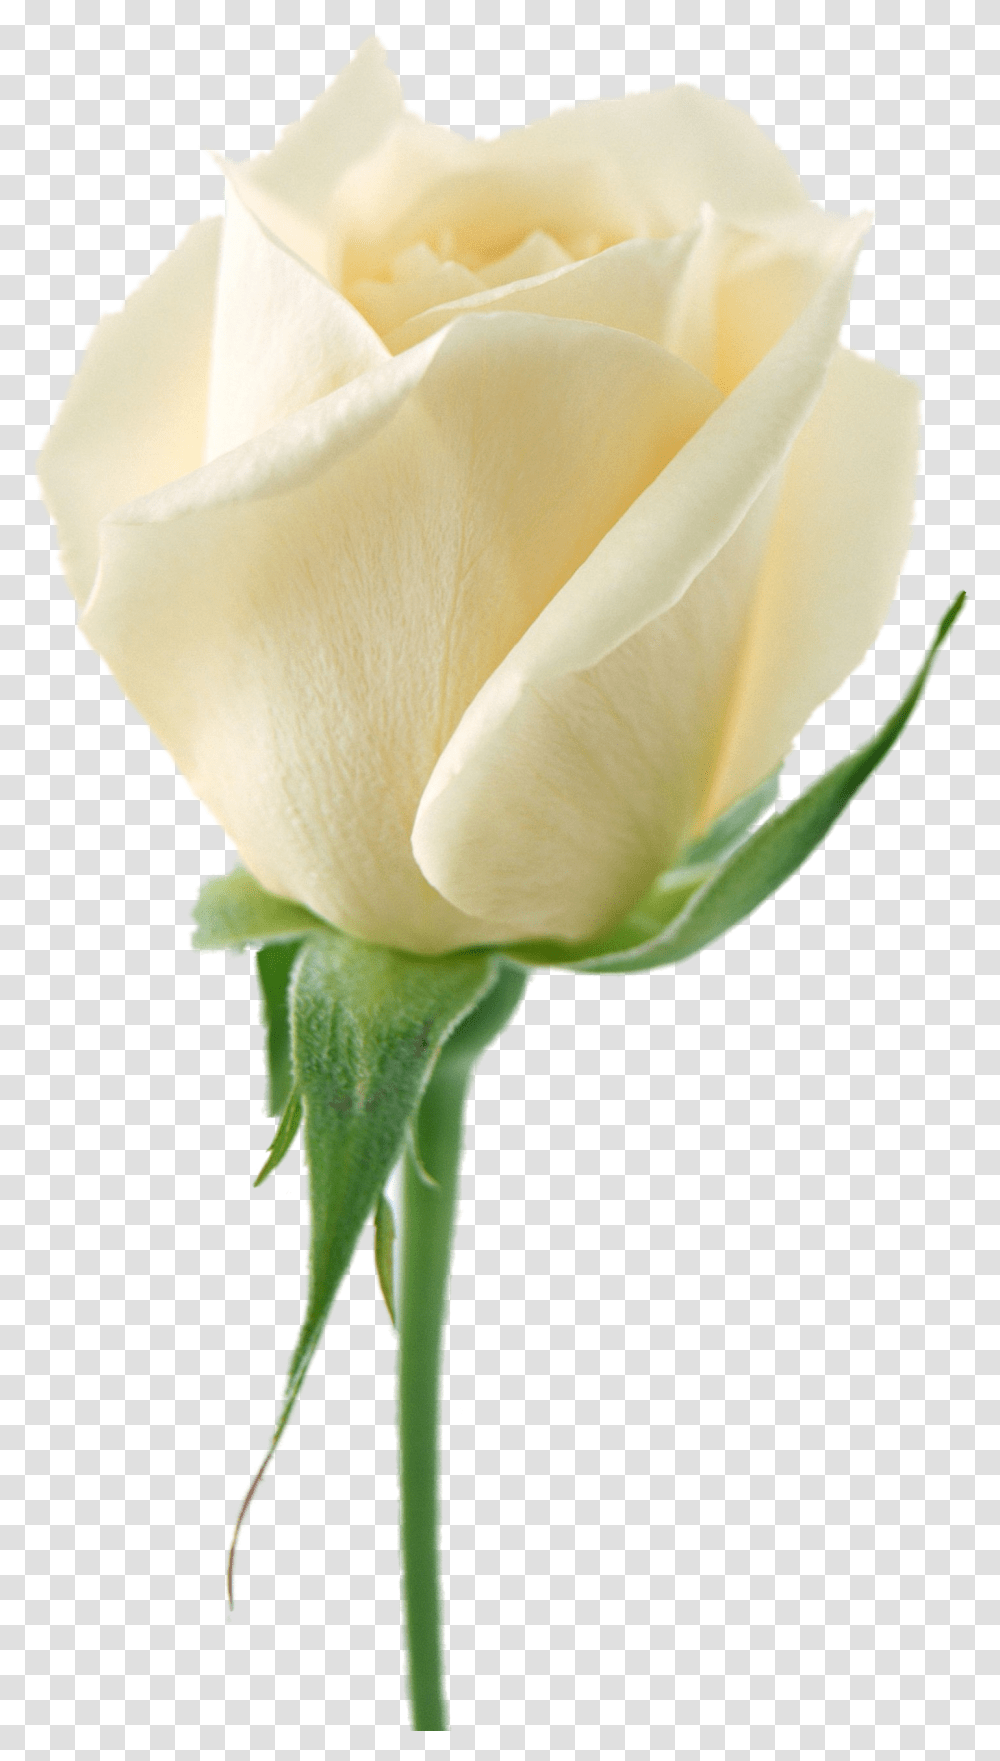 White Rose Image Flower White Rose Flower, Plant, Blossom, Bud, Sprout Transparent Png